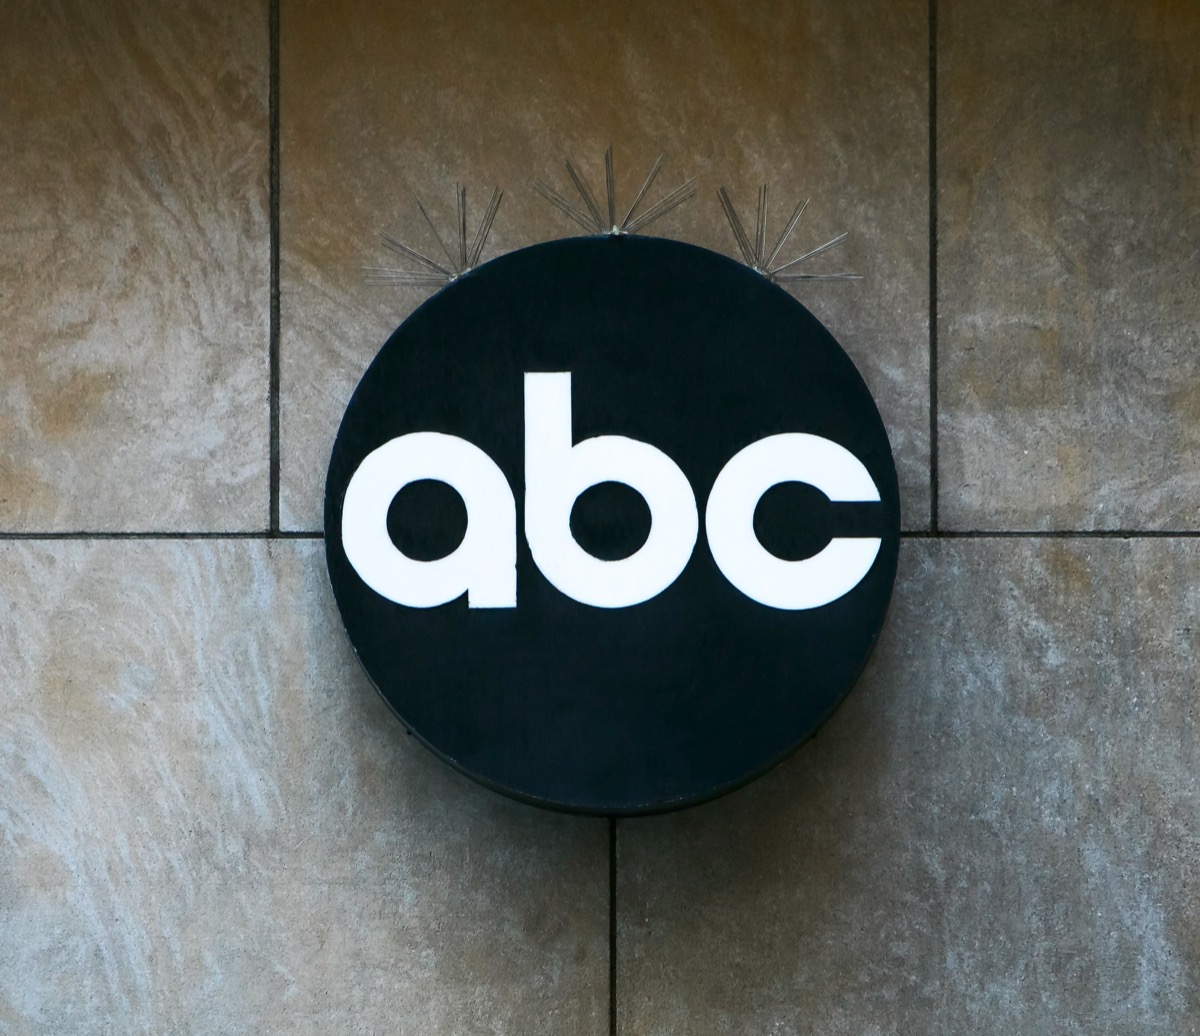 New York, June 25, 2016: A logo of the American Broadcasting Company is hanging outside one of the ABC's buildings on West 67th street in New York City.